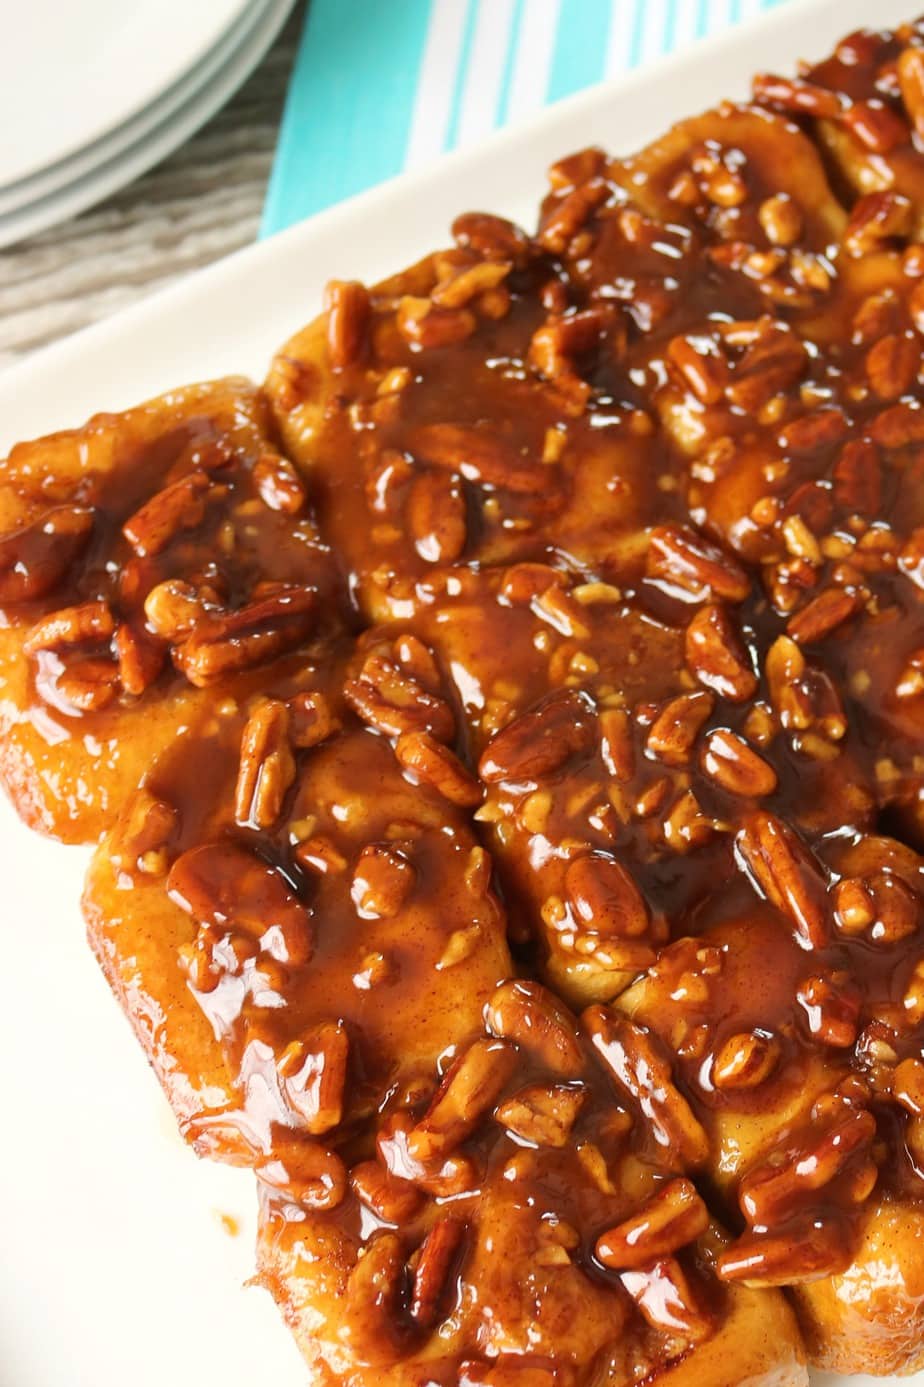 Only 6 Ingredients to the easiest and most delicious Sticky Caramel Pecan Rolls. You won't believe how easy they are to make.